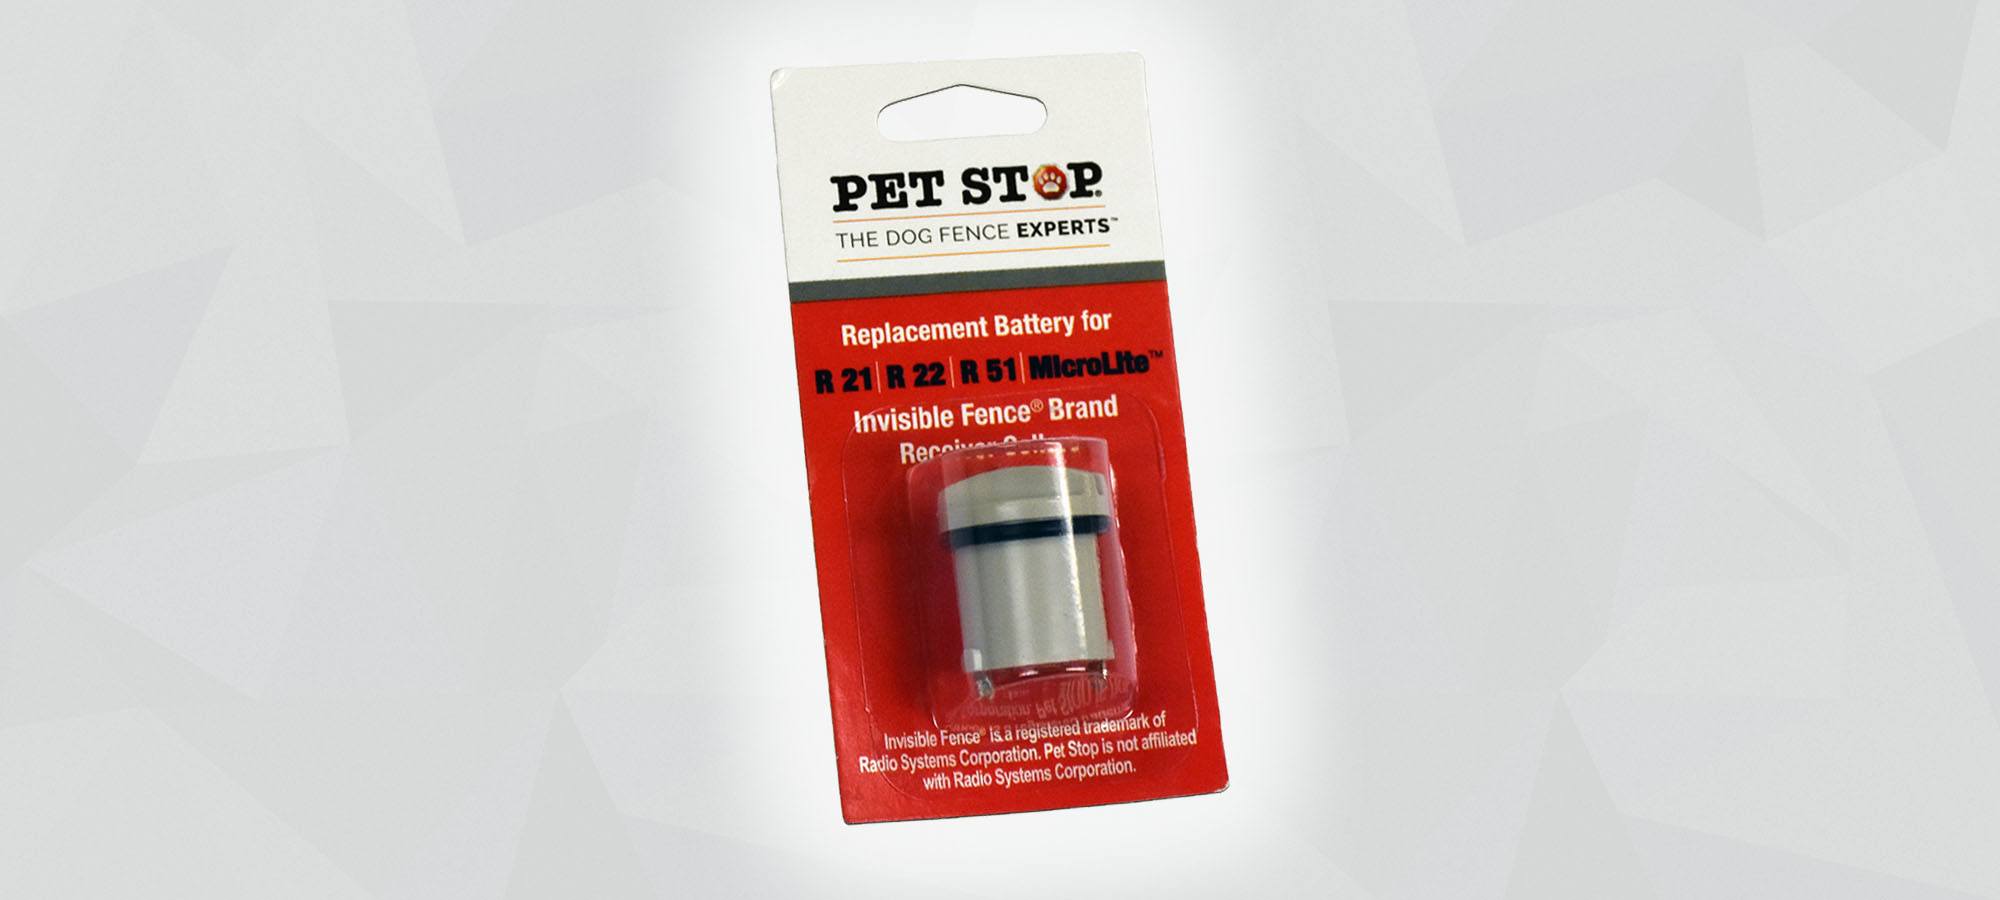 Replacement Dog Fence Batteries for the Invisible Fence® Brand